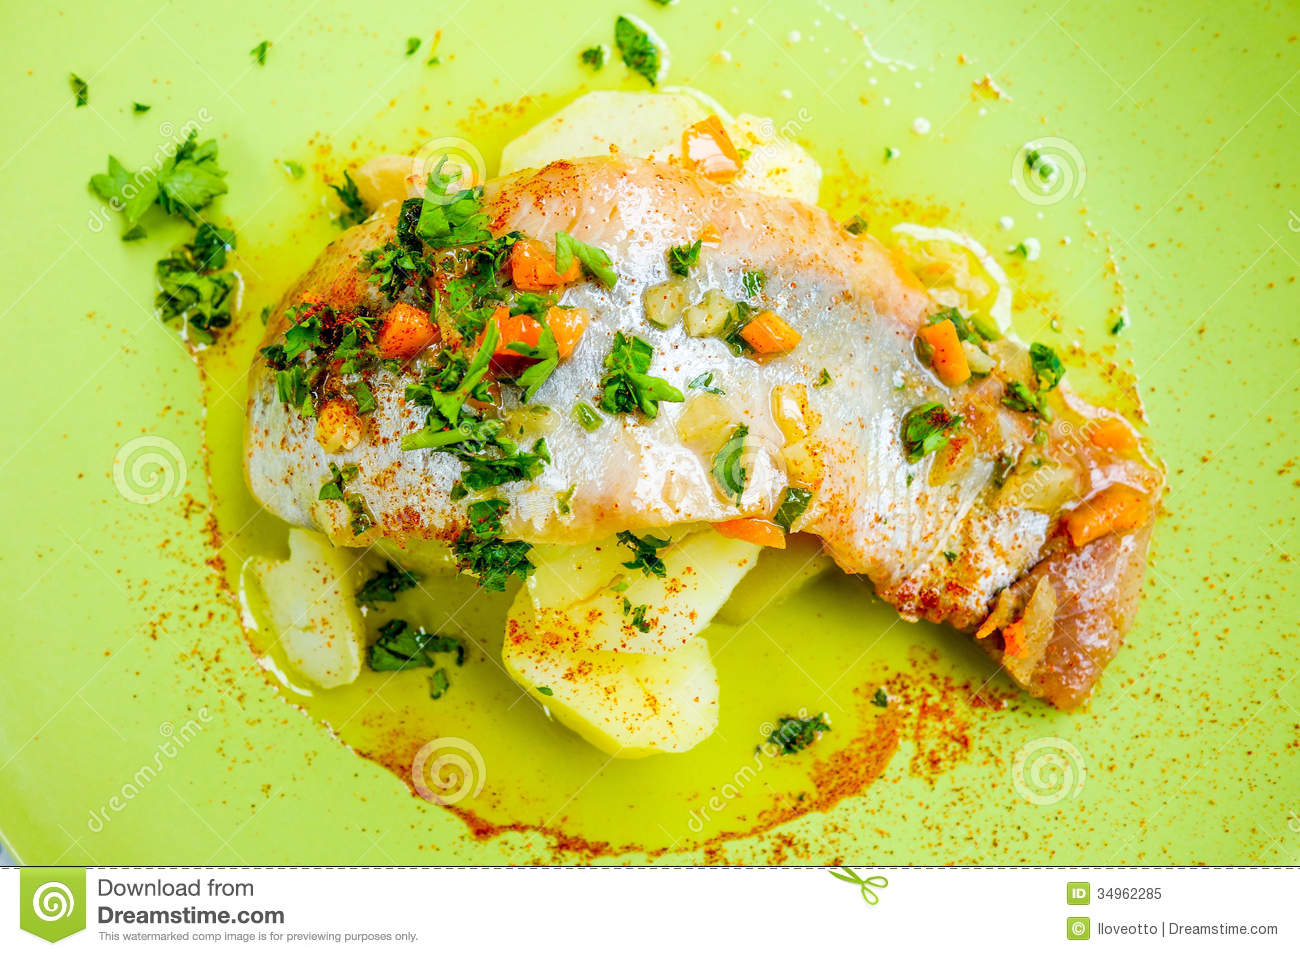 Fine Dining Cuisine Royalty Free Stock Photo   Image  34962285